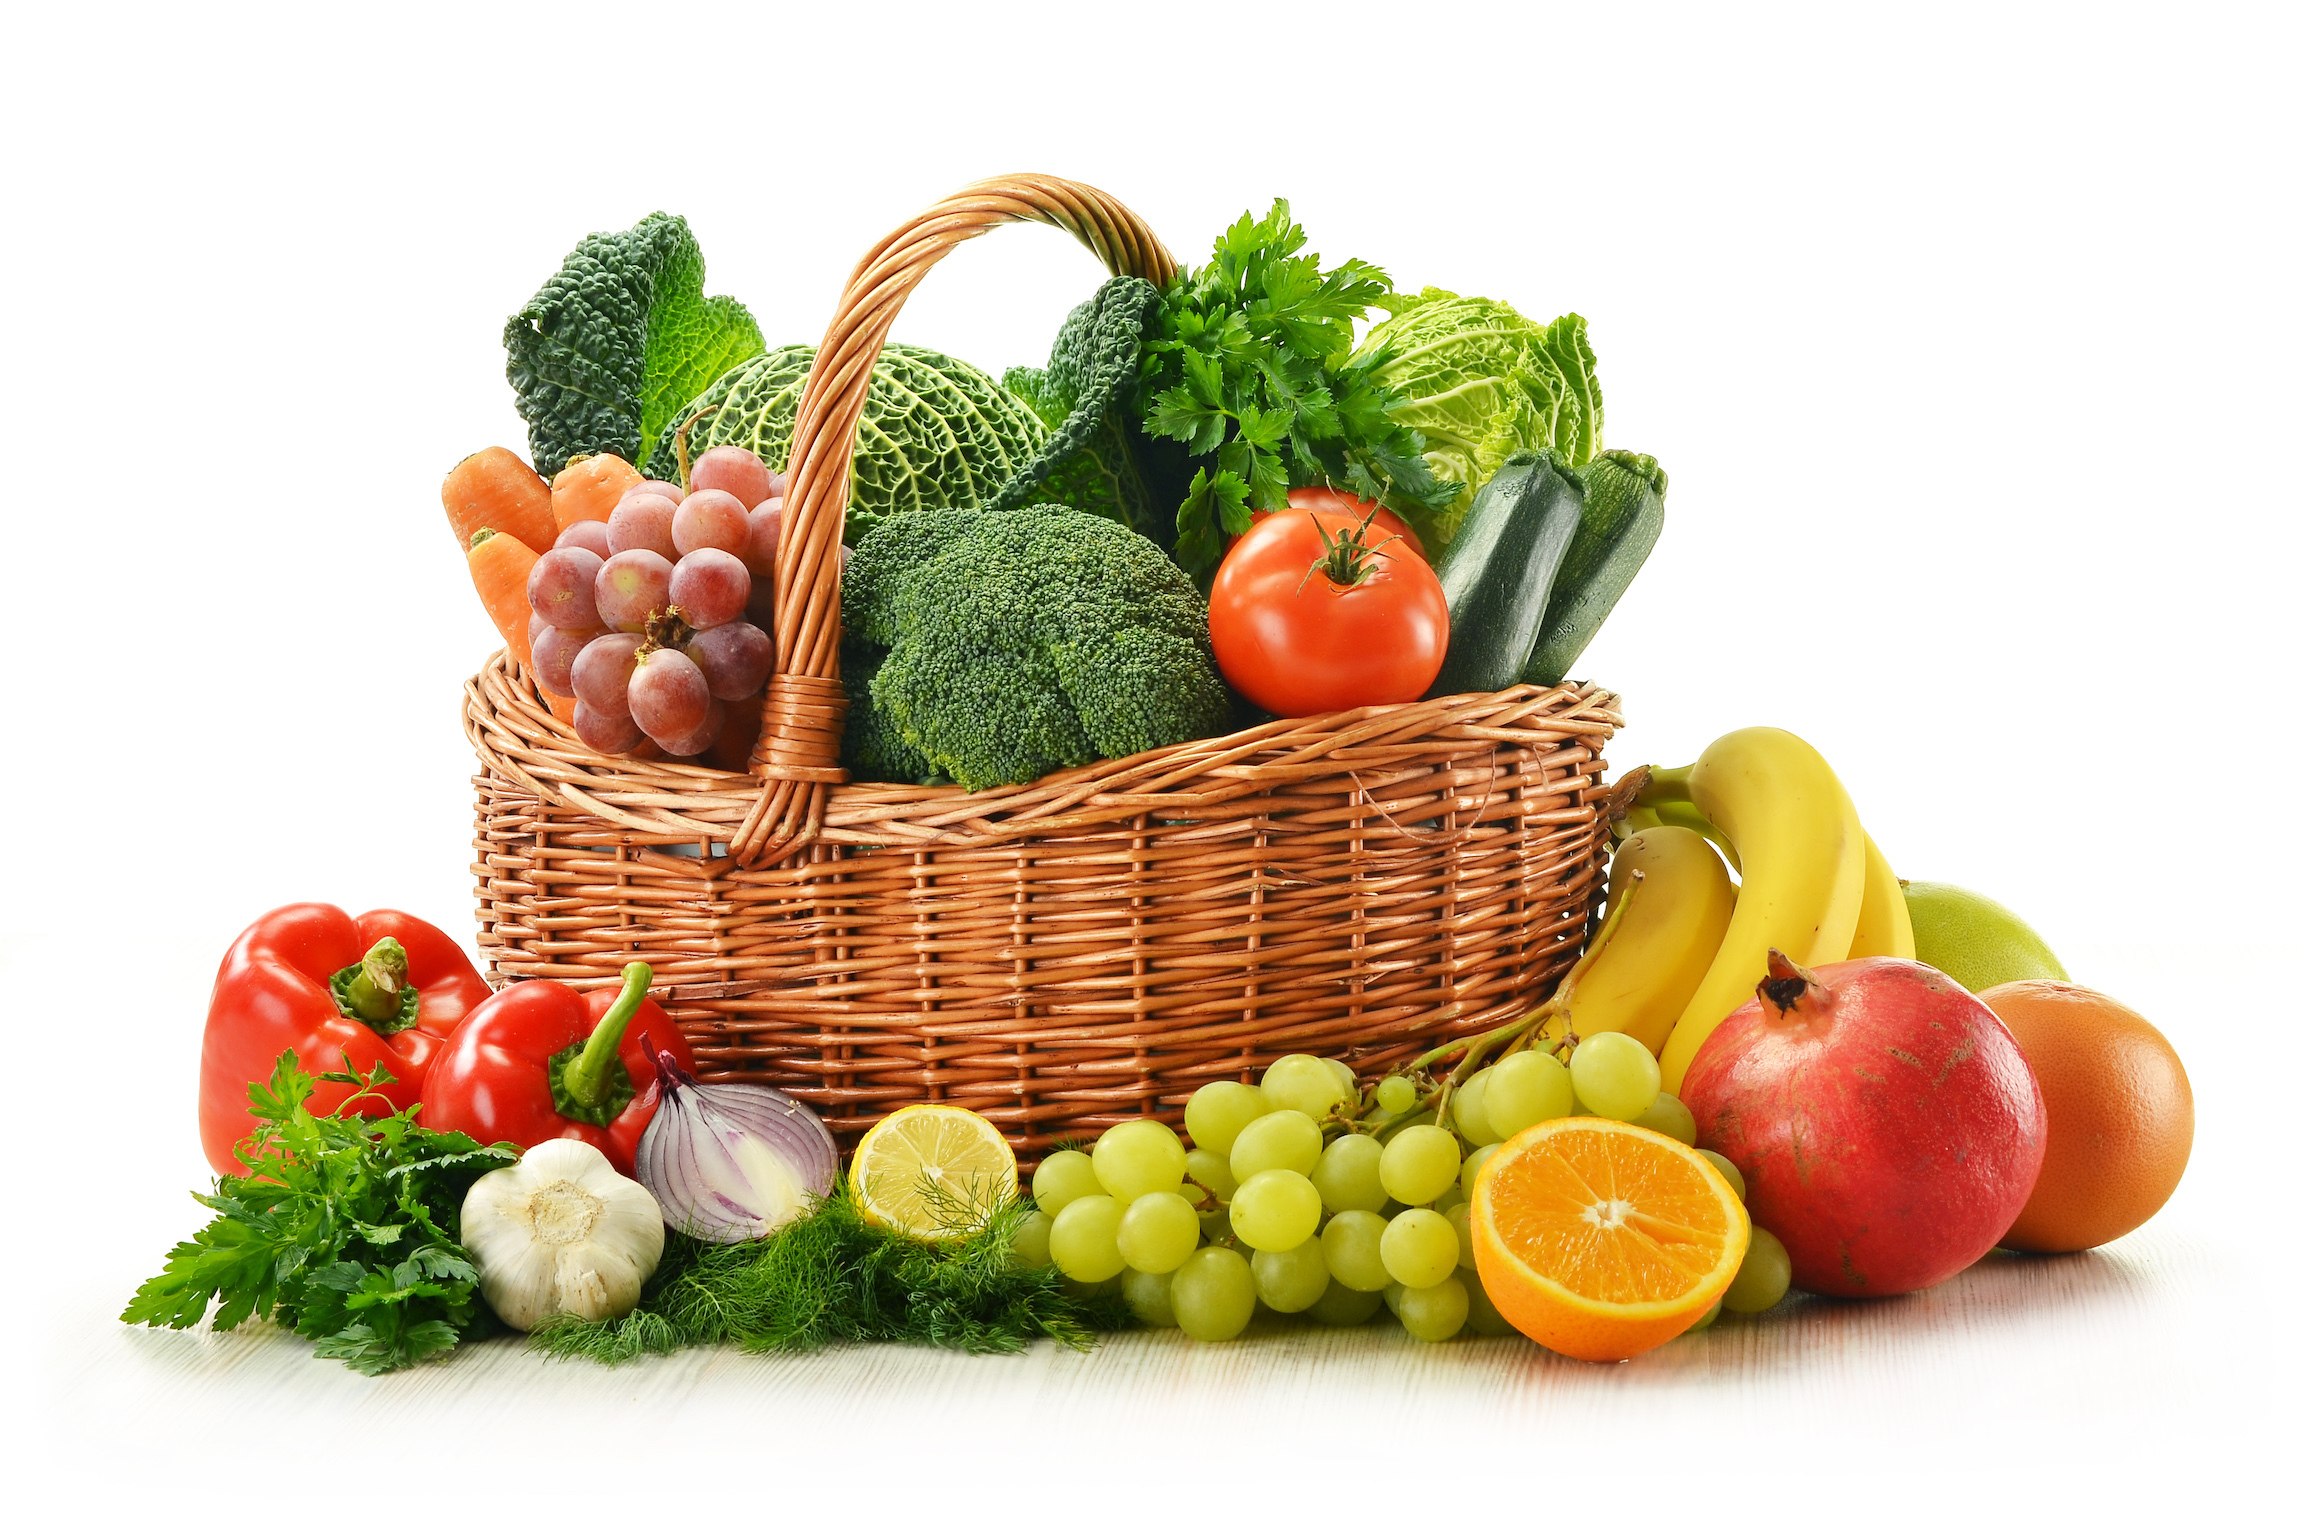 Tips on How to Add More Fruits and Vegetables Daily